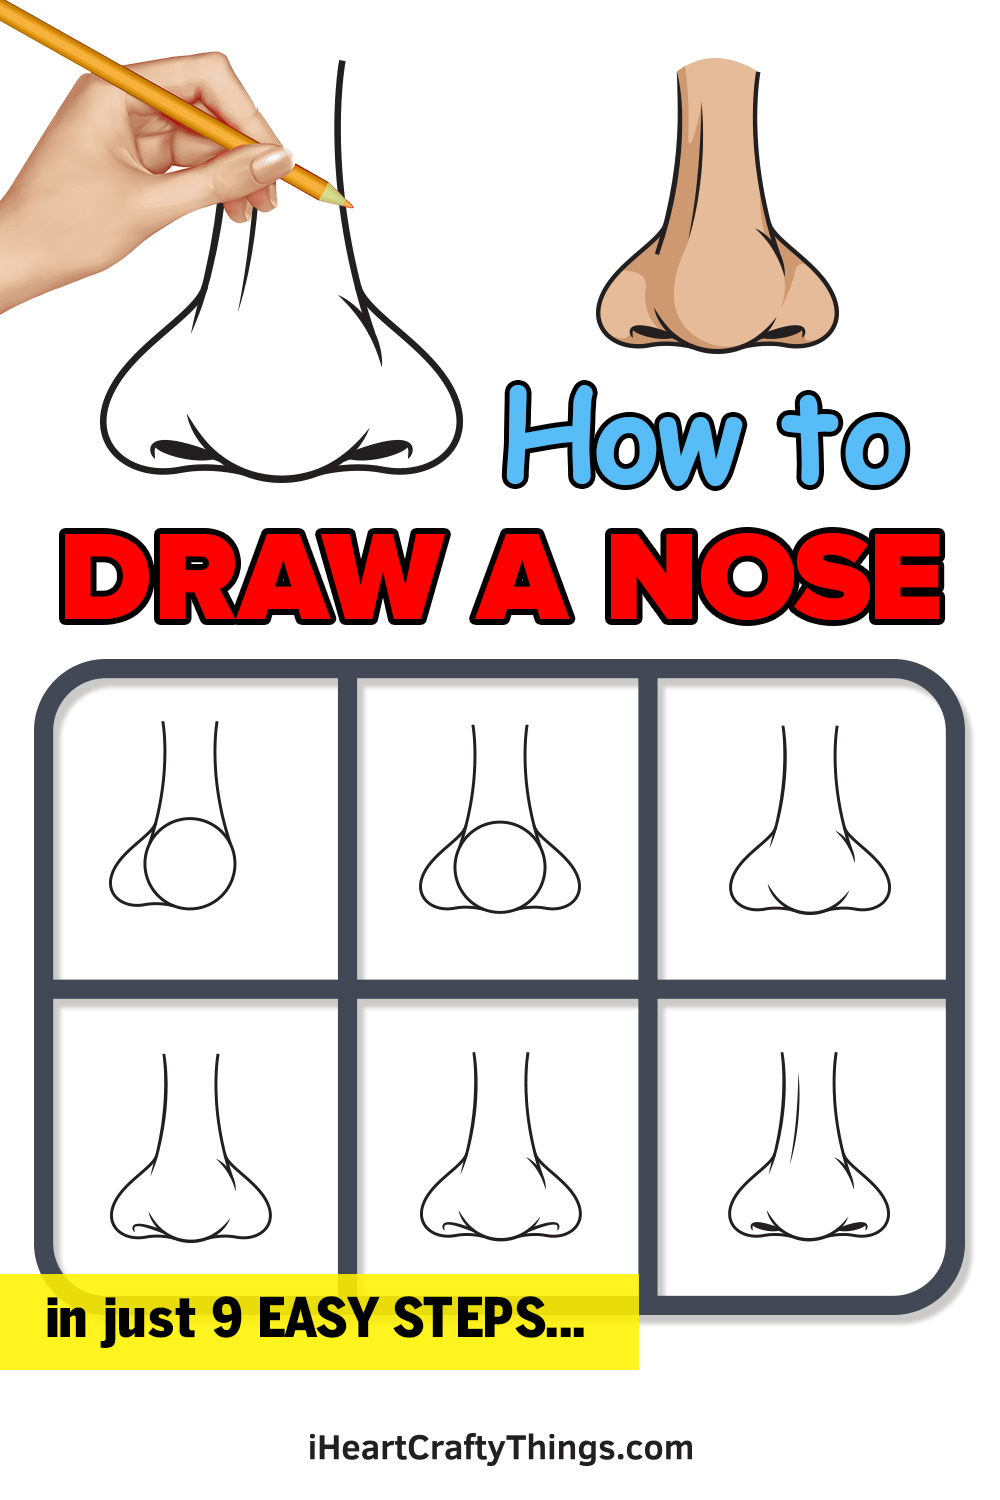 how to draw a nose in 9 easy steps